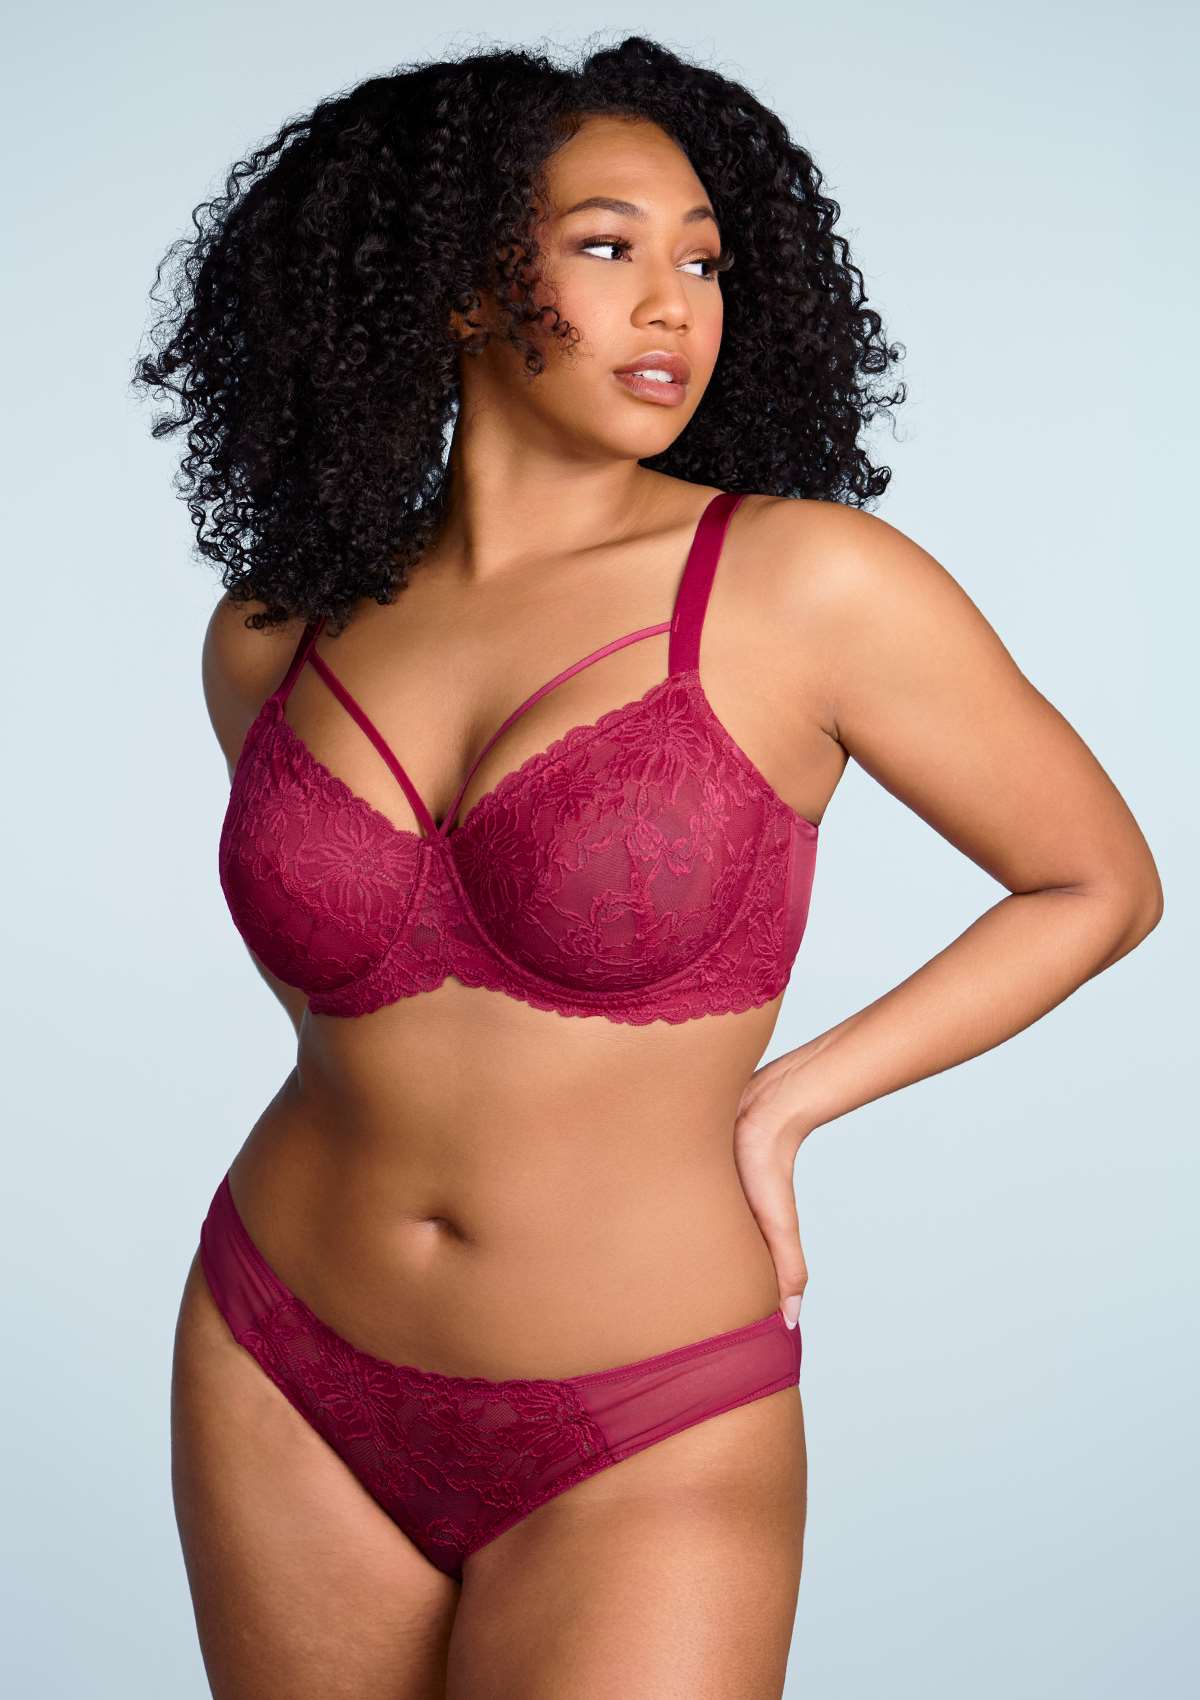 HSIA Pretty In Petals Lace Panties And Bra Set: Plus Size Women Bra - Red / 32 / G